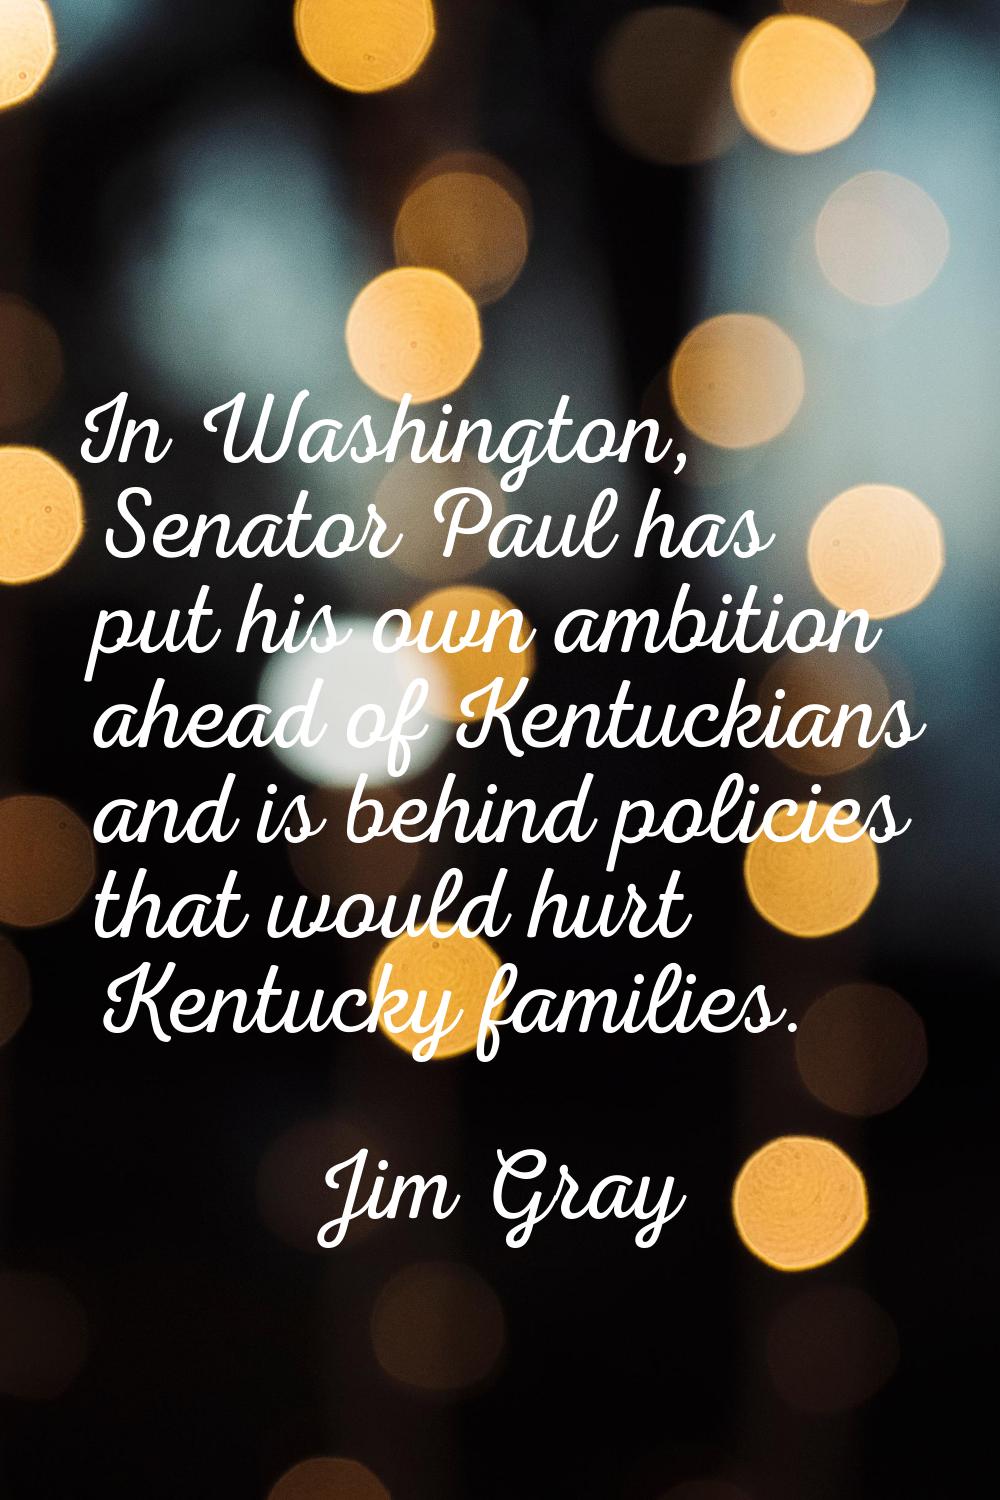 In Washington, Senator Paul has put his own ambition ahead of Kentuckians and is behind policies th